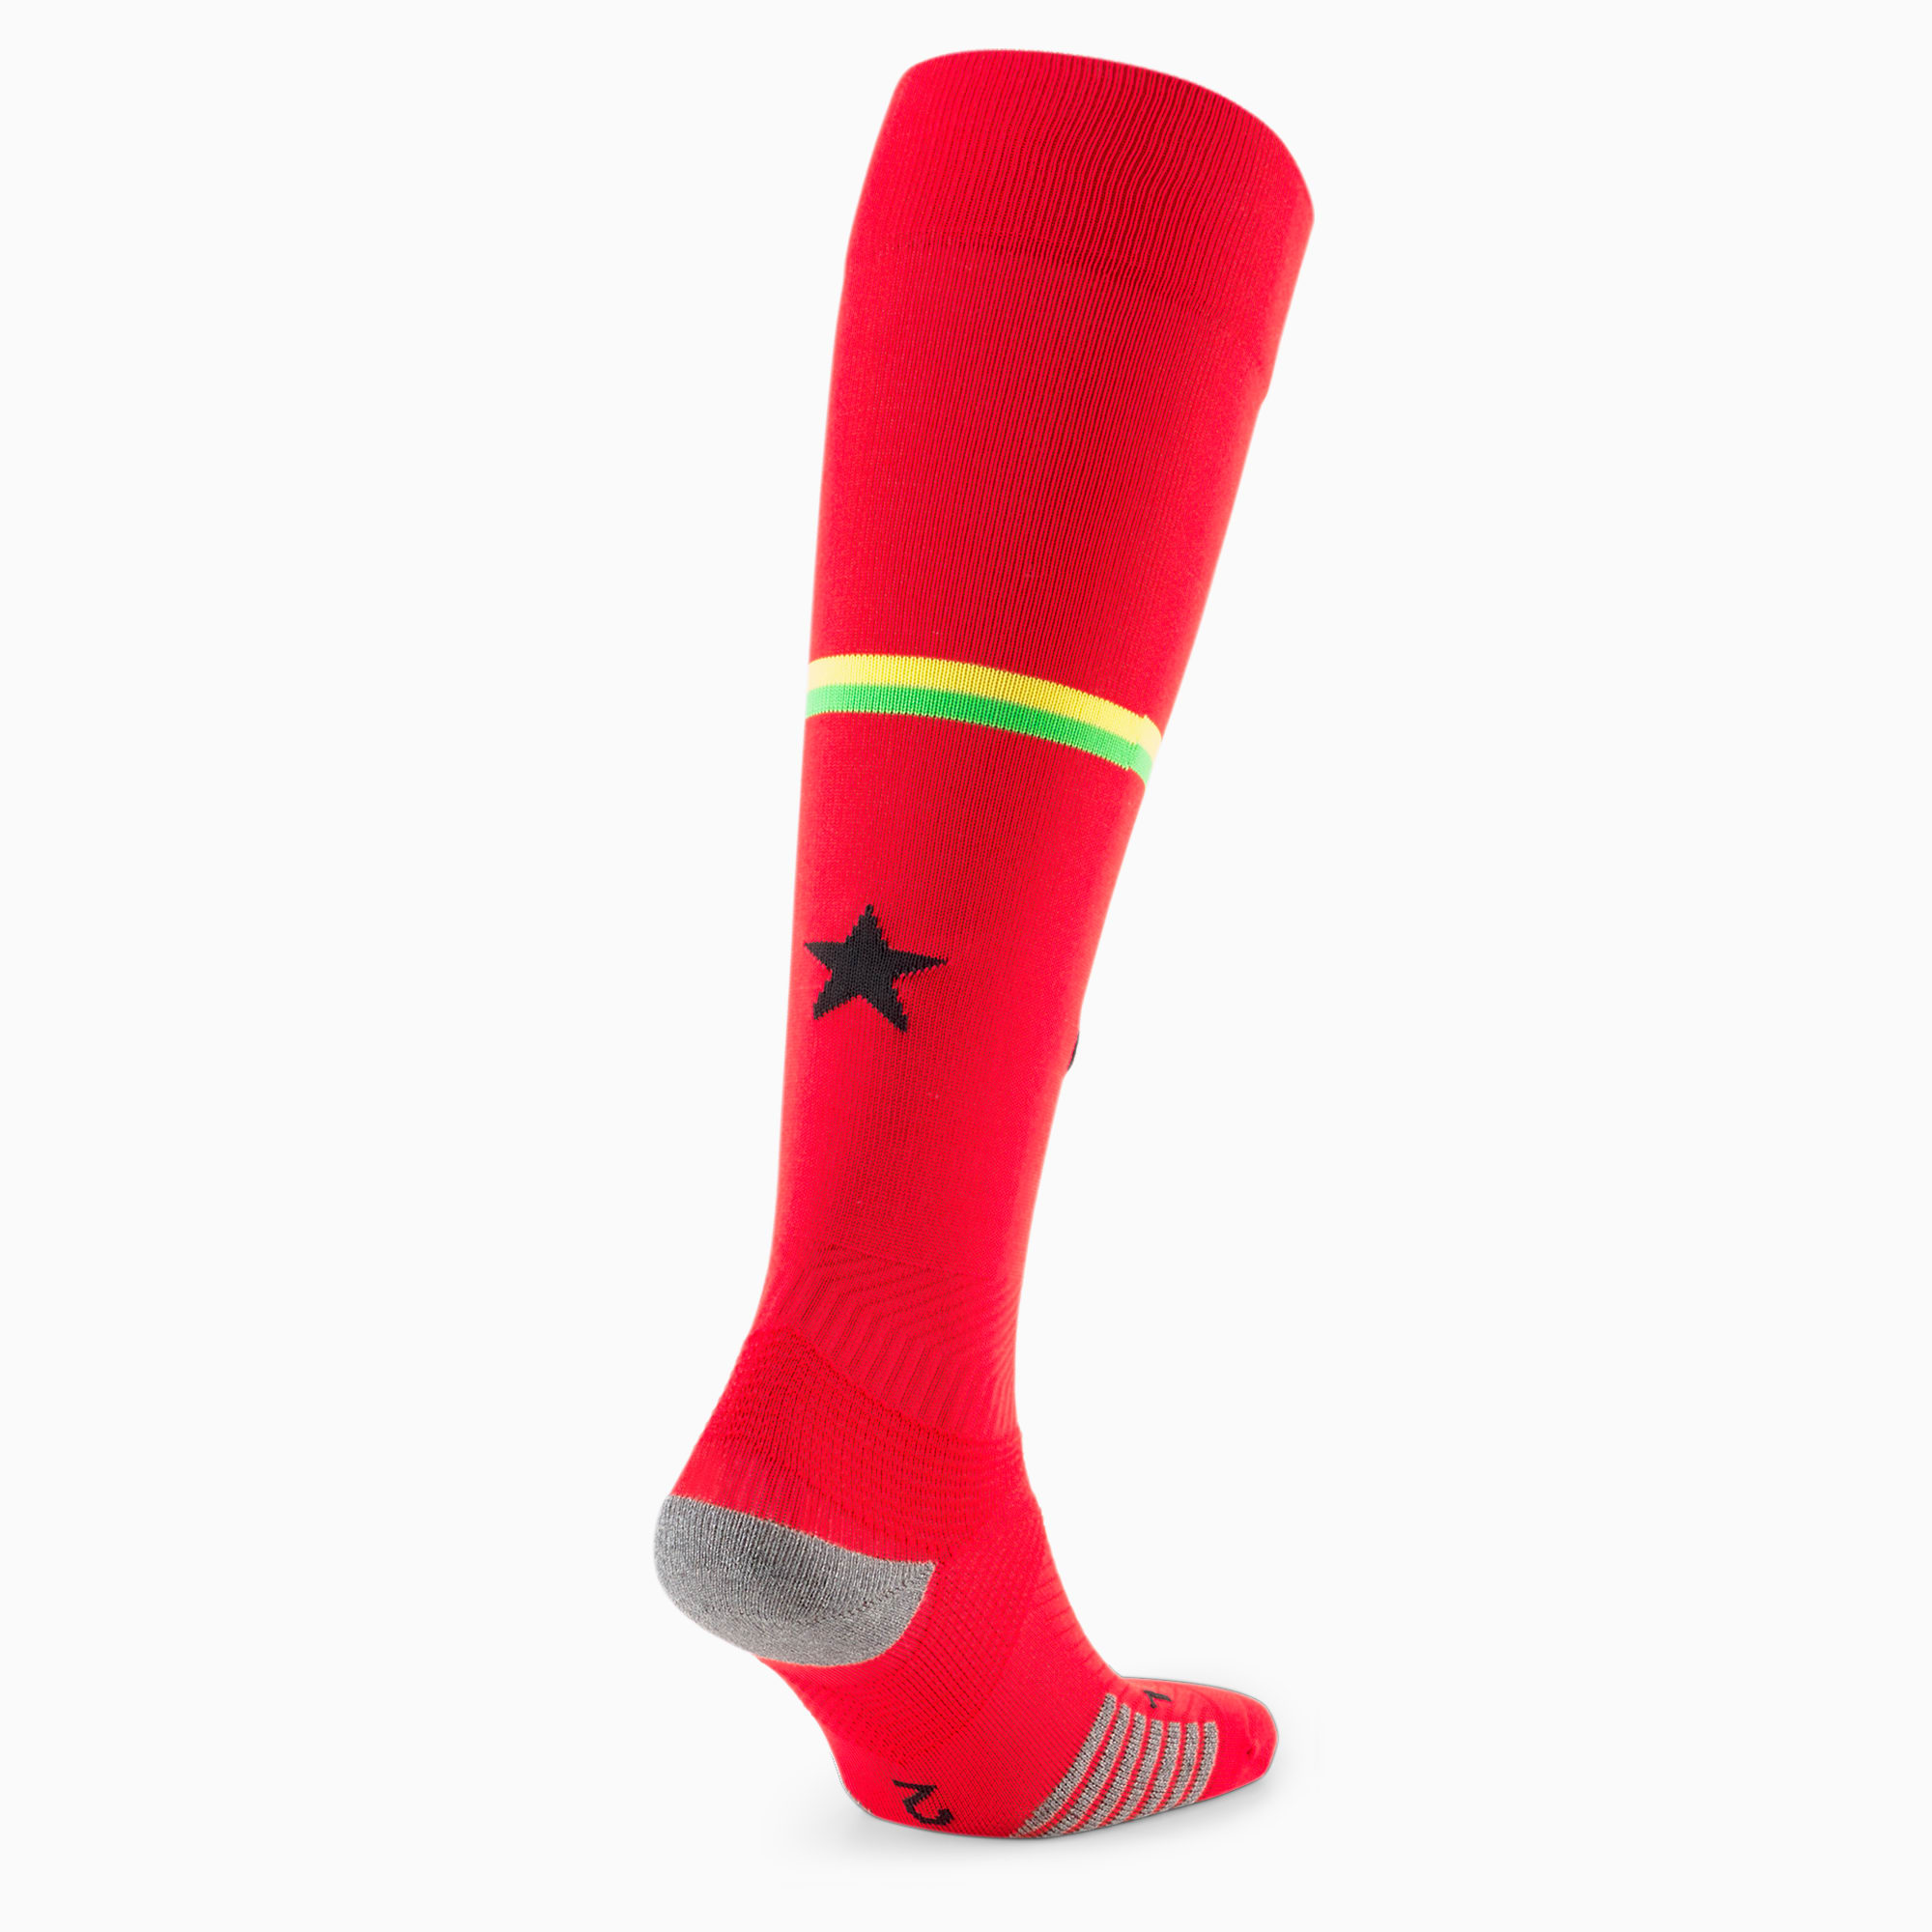 PUMA Chaussettes Ghana Striped Replica Homme, Rouge/Jaune